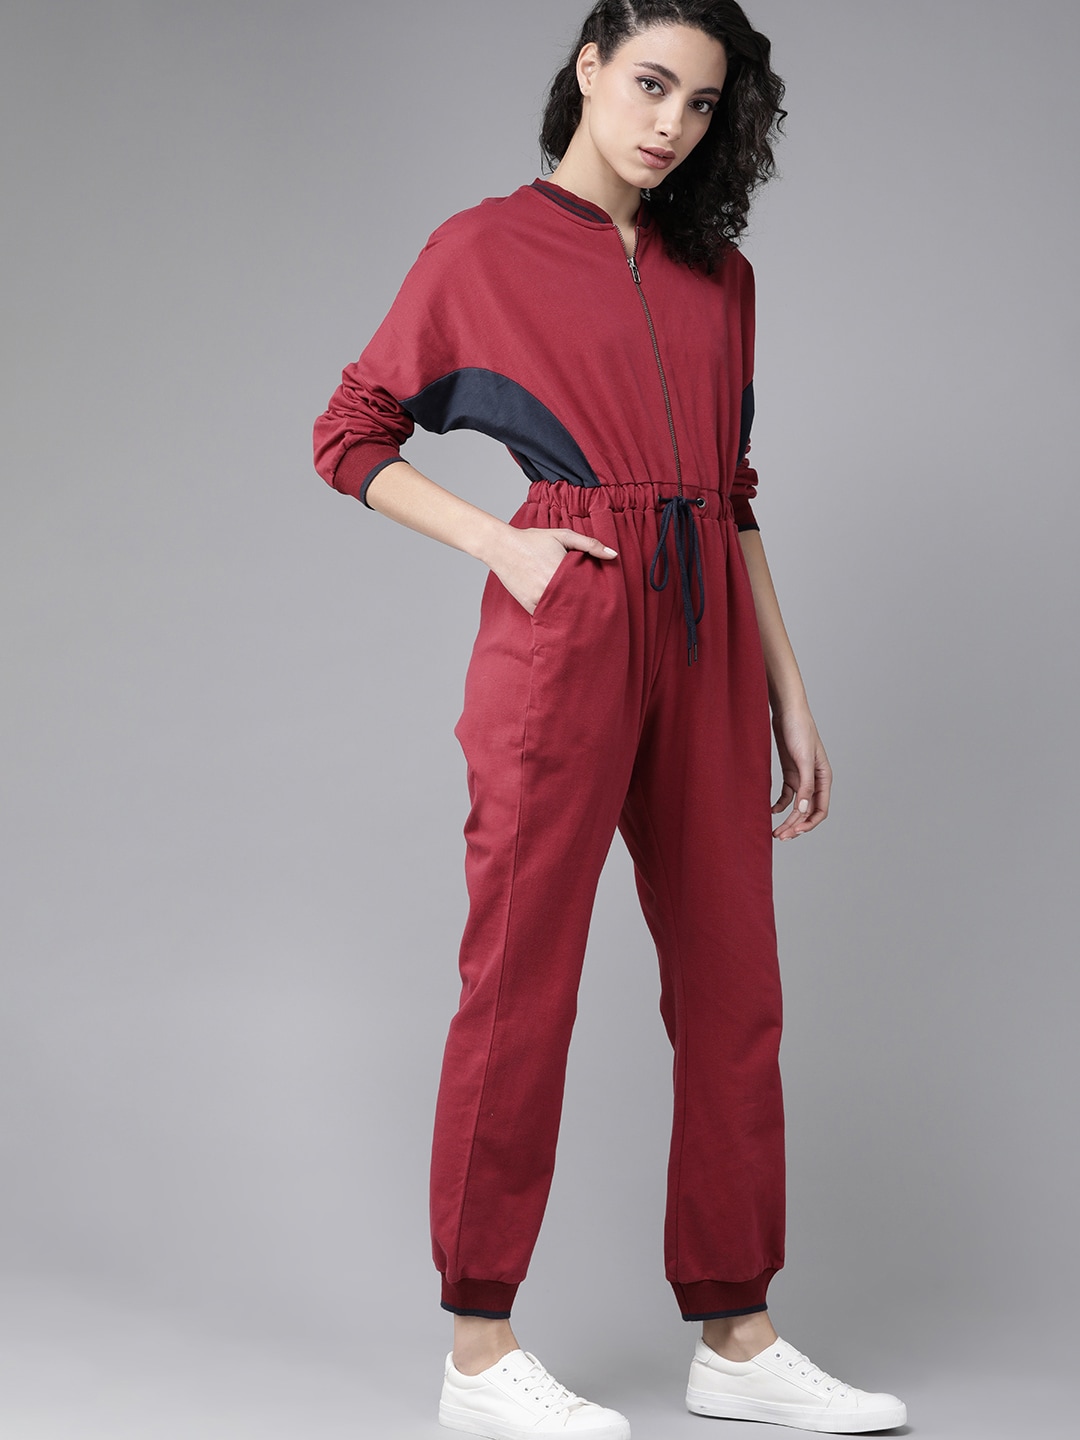 Roadster Women Maroon Solid Joggers Jumpsuit Price in India